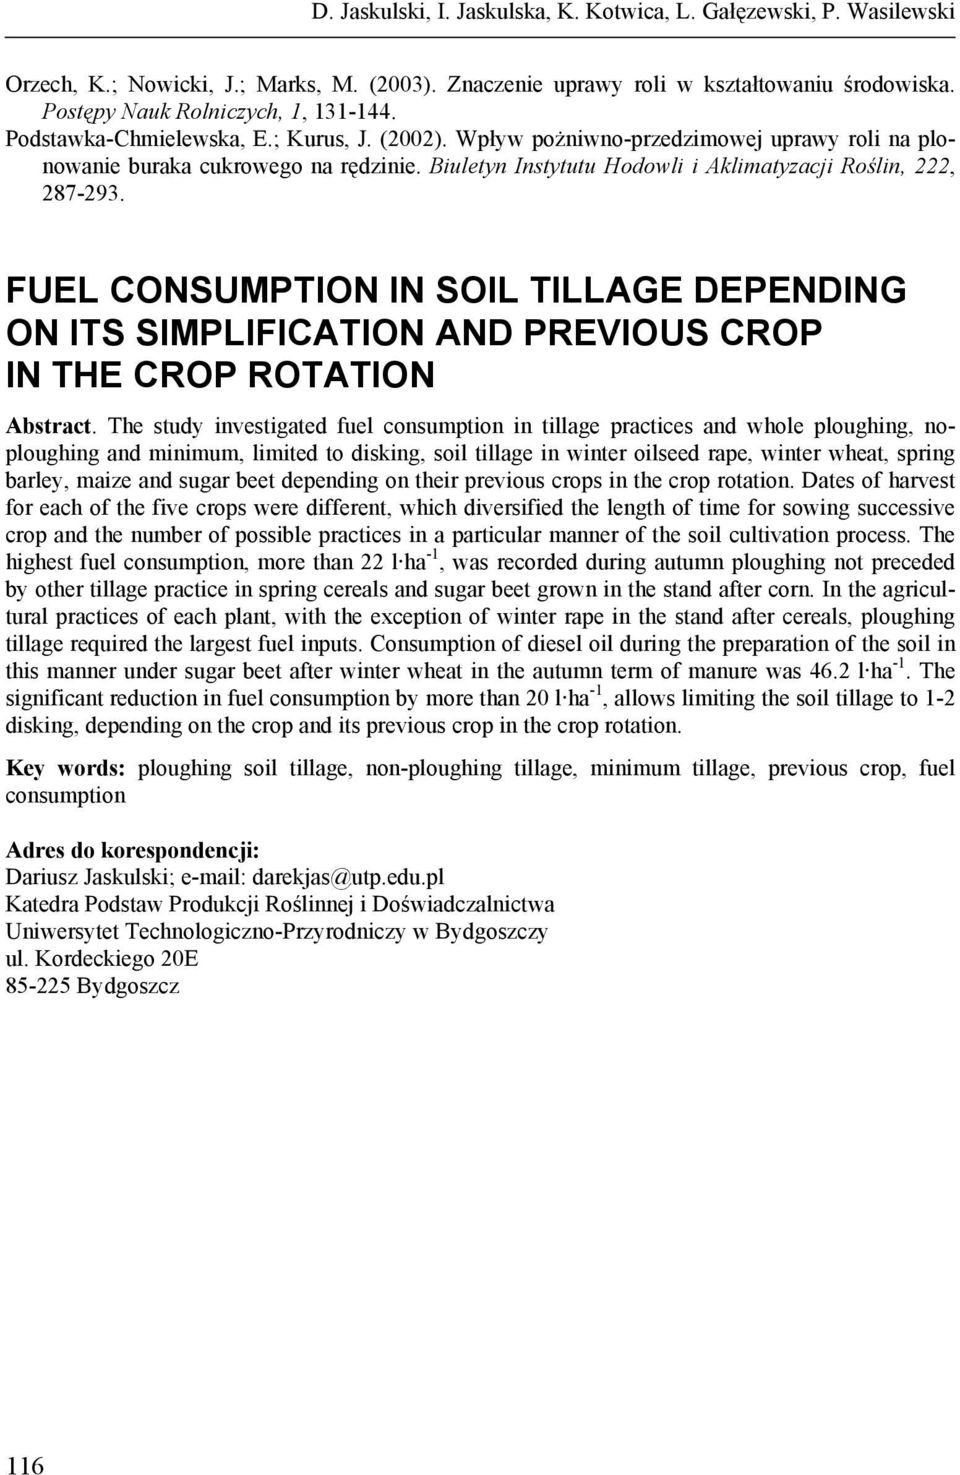 FUEL CONSPTION IN SOIL TILLAGE DEPENDING ON ITS SIMPLIFICATION AND PREVIOUS CROP IN THE CROP ROTATION Absrac.